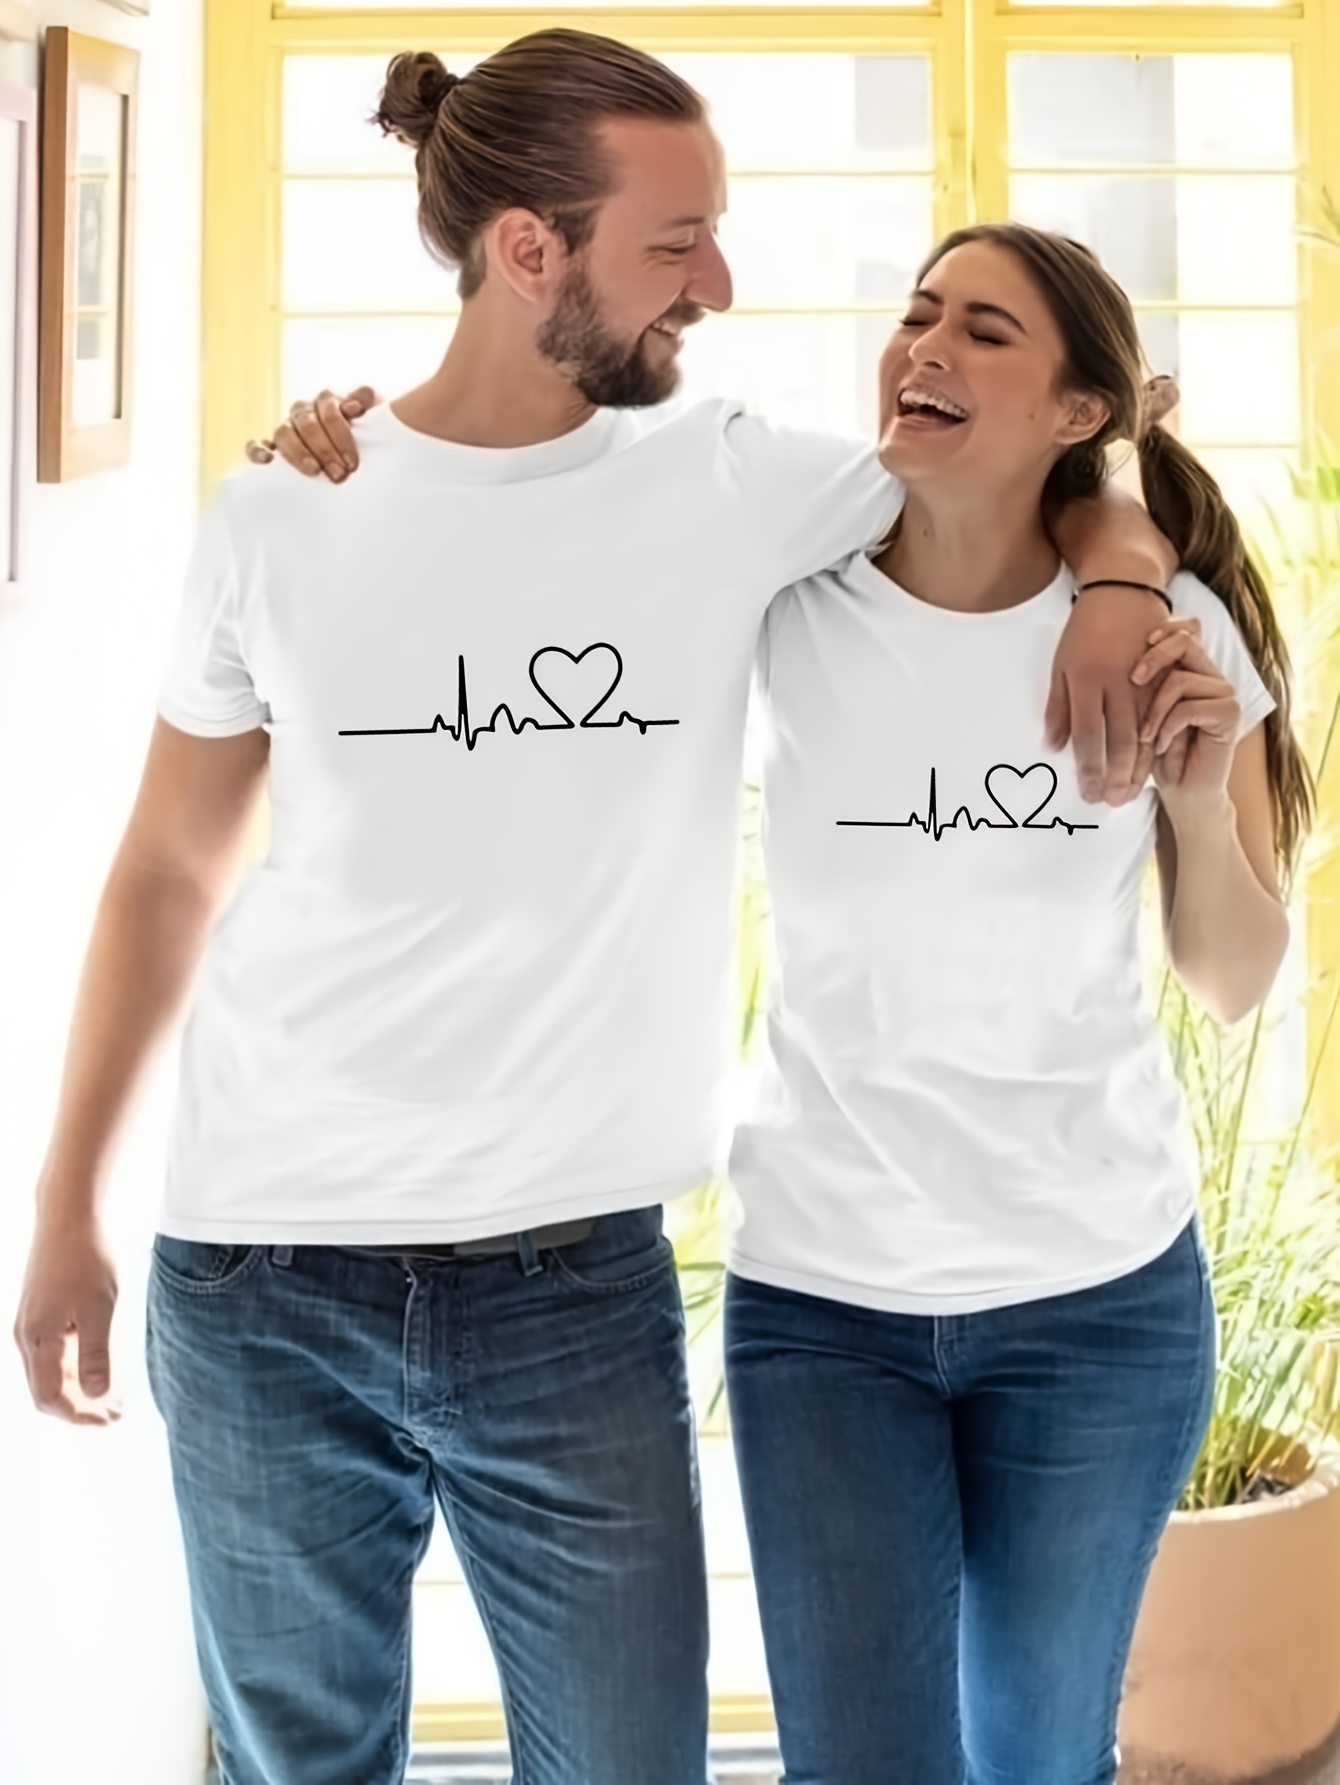 CouplesWorld His and Hers Matching Sets - Matching Couples Stuff - Matching His and Her Clothes - Couples Wedding Gifts - Couple Outfits Matching Sets